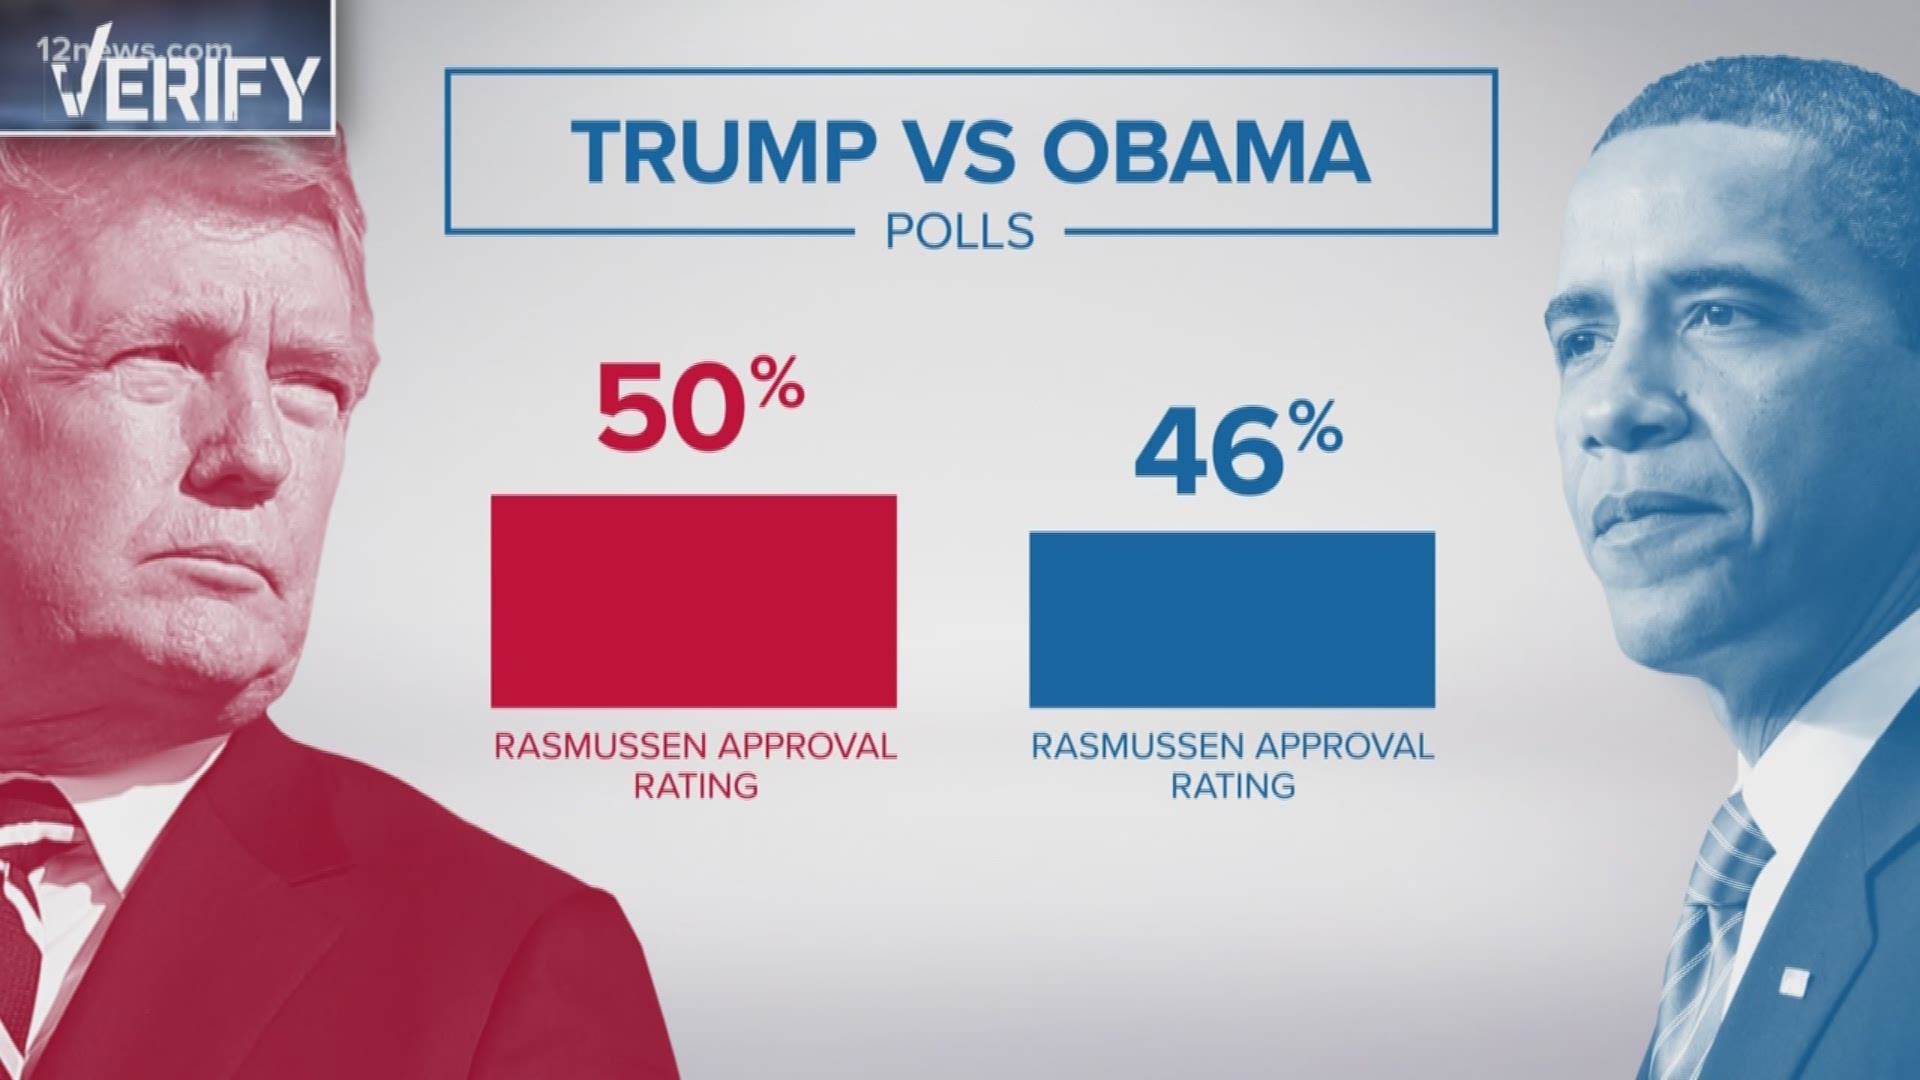 This morning, the president tweeted, "Thank you to Rasmussen for the honest polling. Just hit 50%, which is higher than Cheatin' Obama at the same time in his Administration."